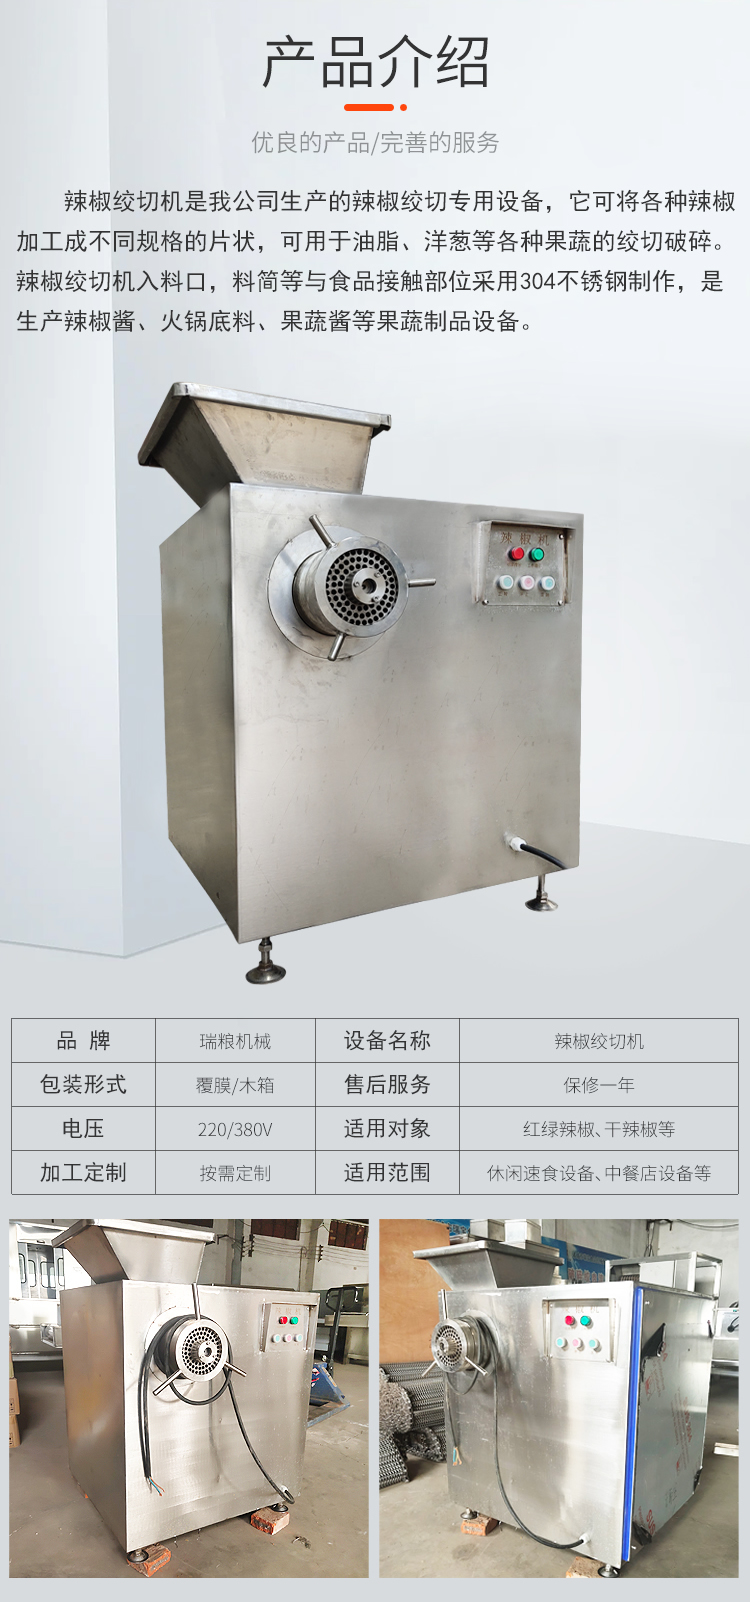 Ruiliang Machinery Production Pepper Machine Vegetable Pepper Pepper Machine Pepper Complete Assembly Line